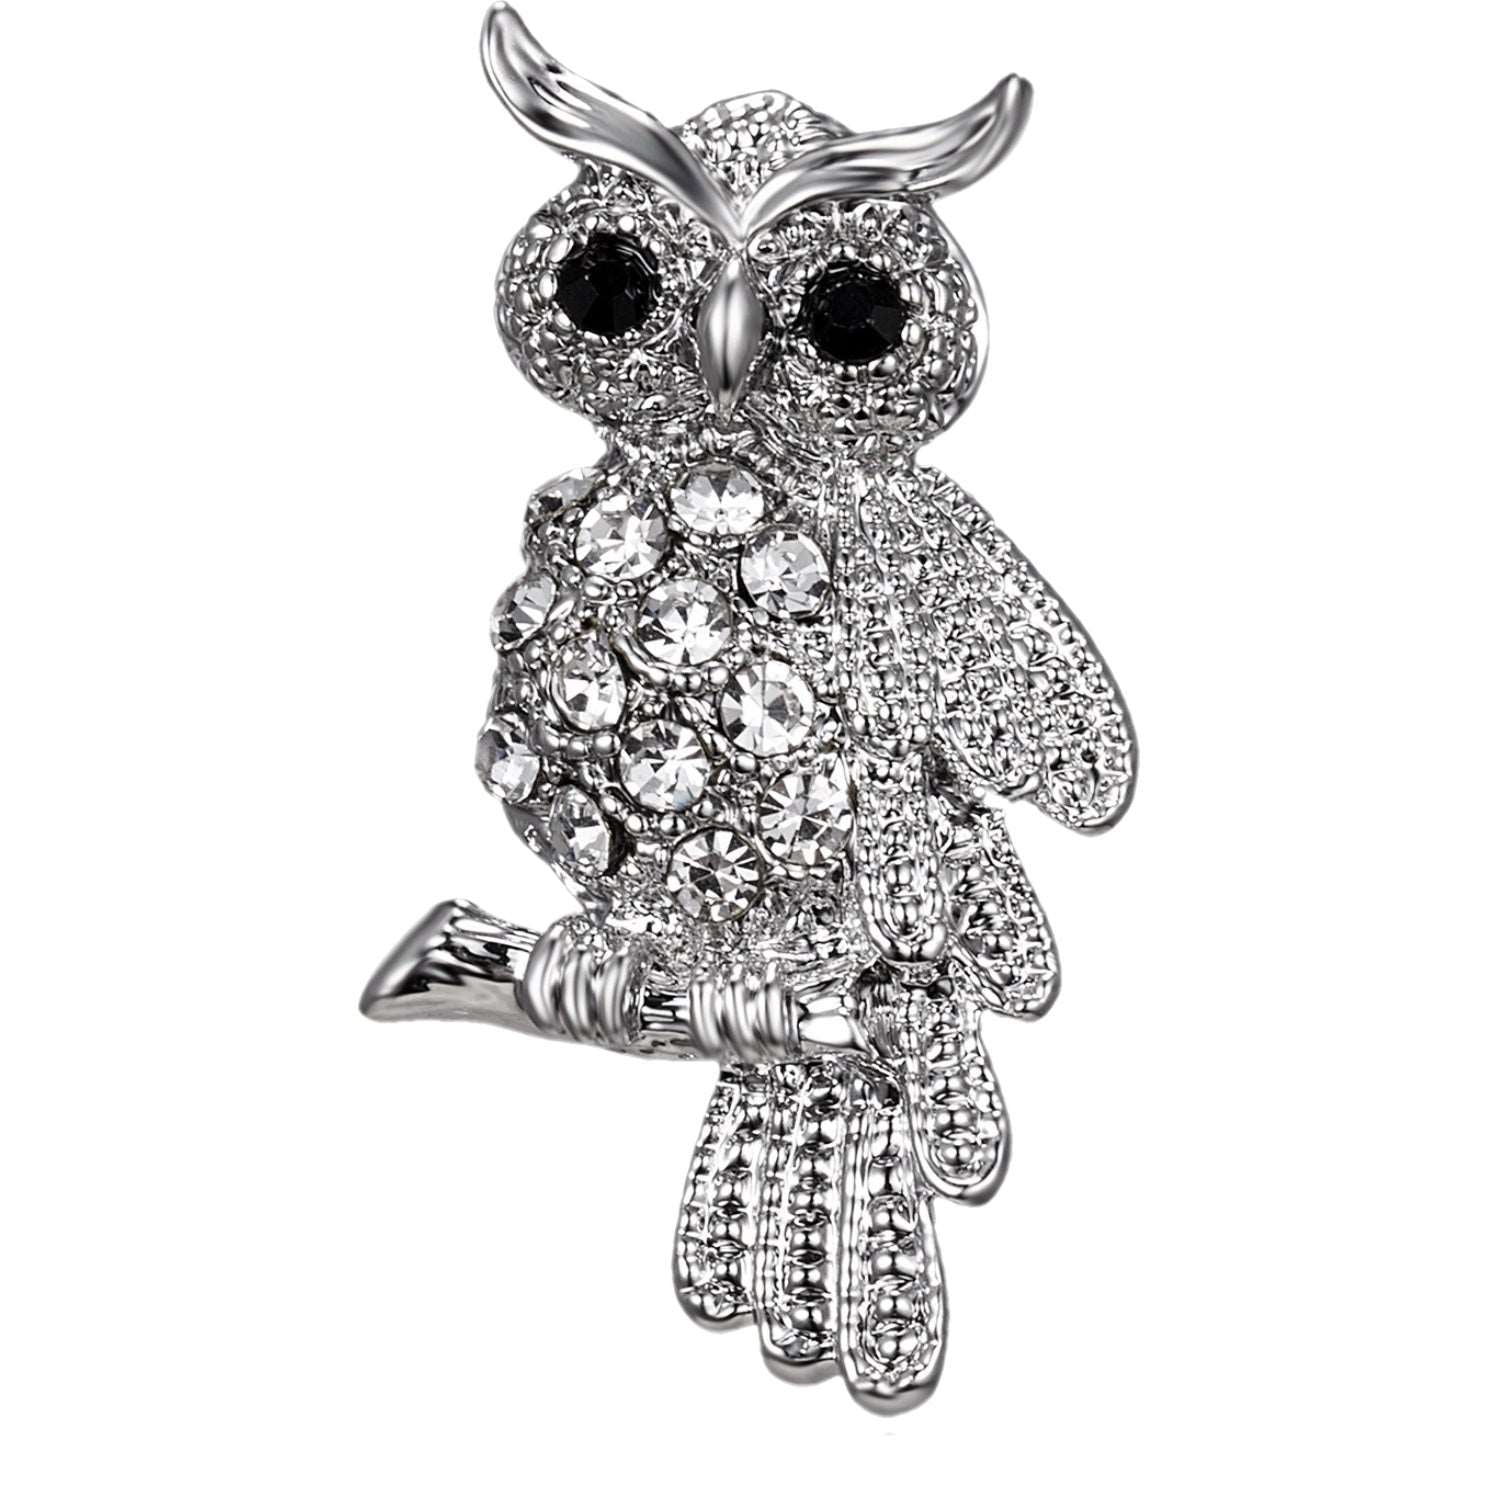 Mini Owl Crystal Embellished Silver Brooch for Scarf or Pashmina